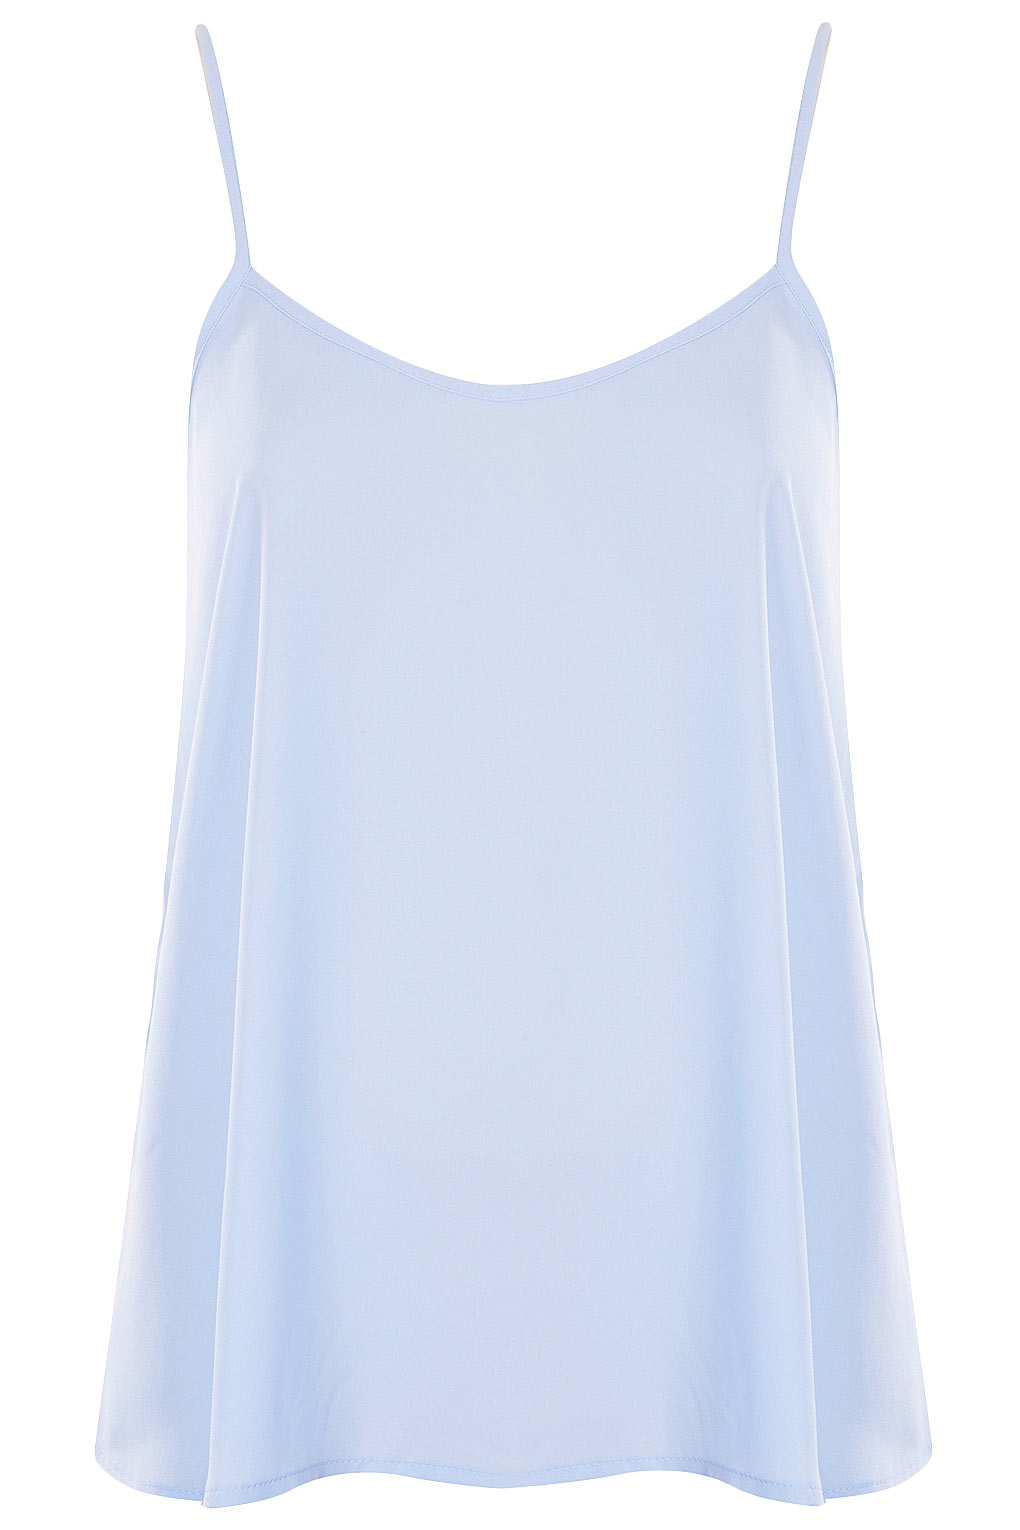 pale blue camisole top,Save up to 15%,www.ilcascinone.com